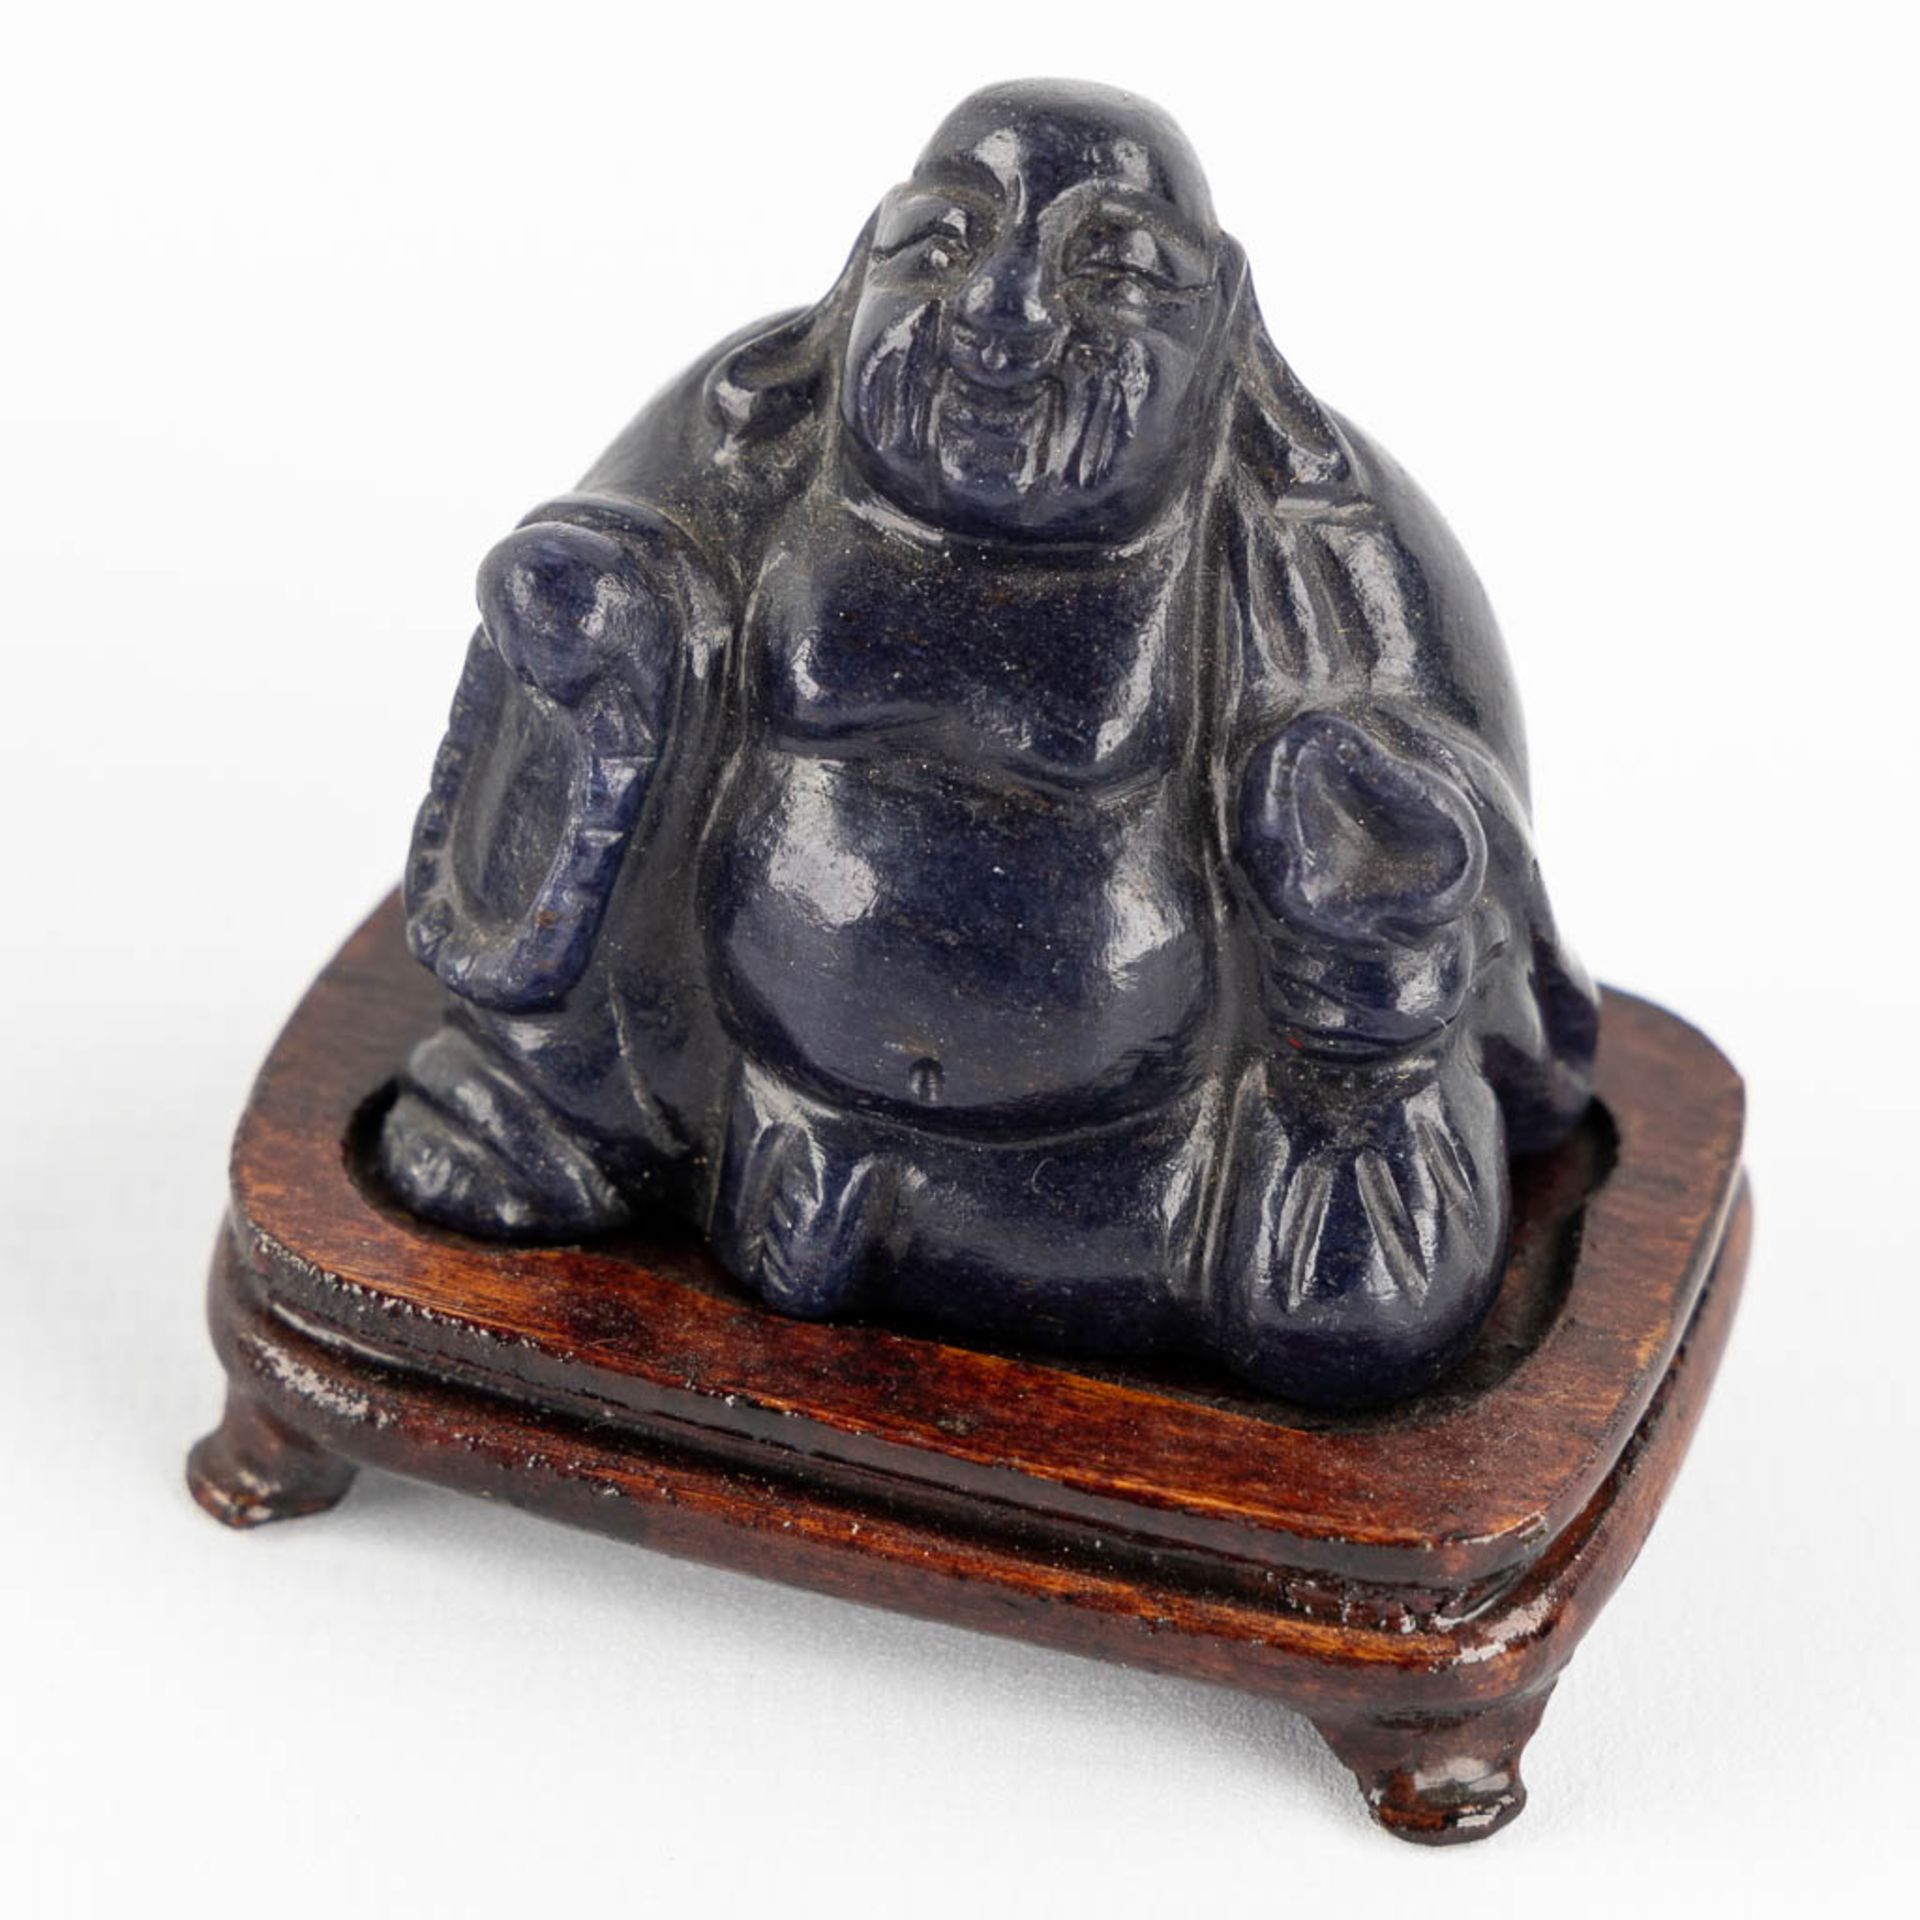 Six Buddha and a snuff bottle, Sculptured hardstones or jade. China. (L:6 x W:8 x H:11,5 cm) - Image 11 of 16